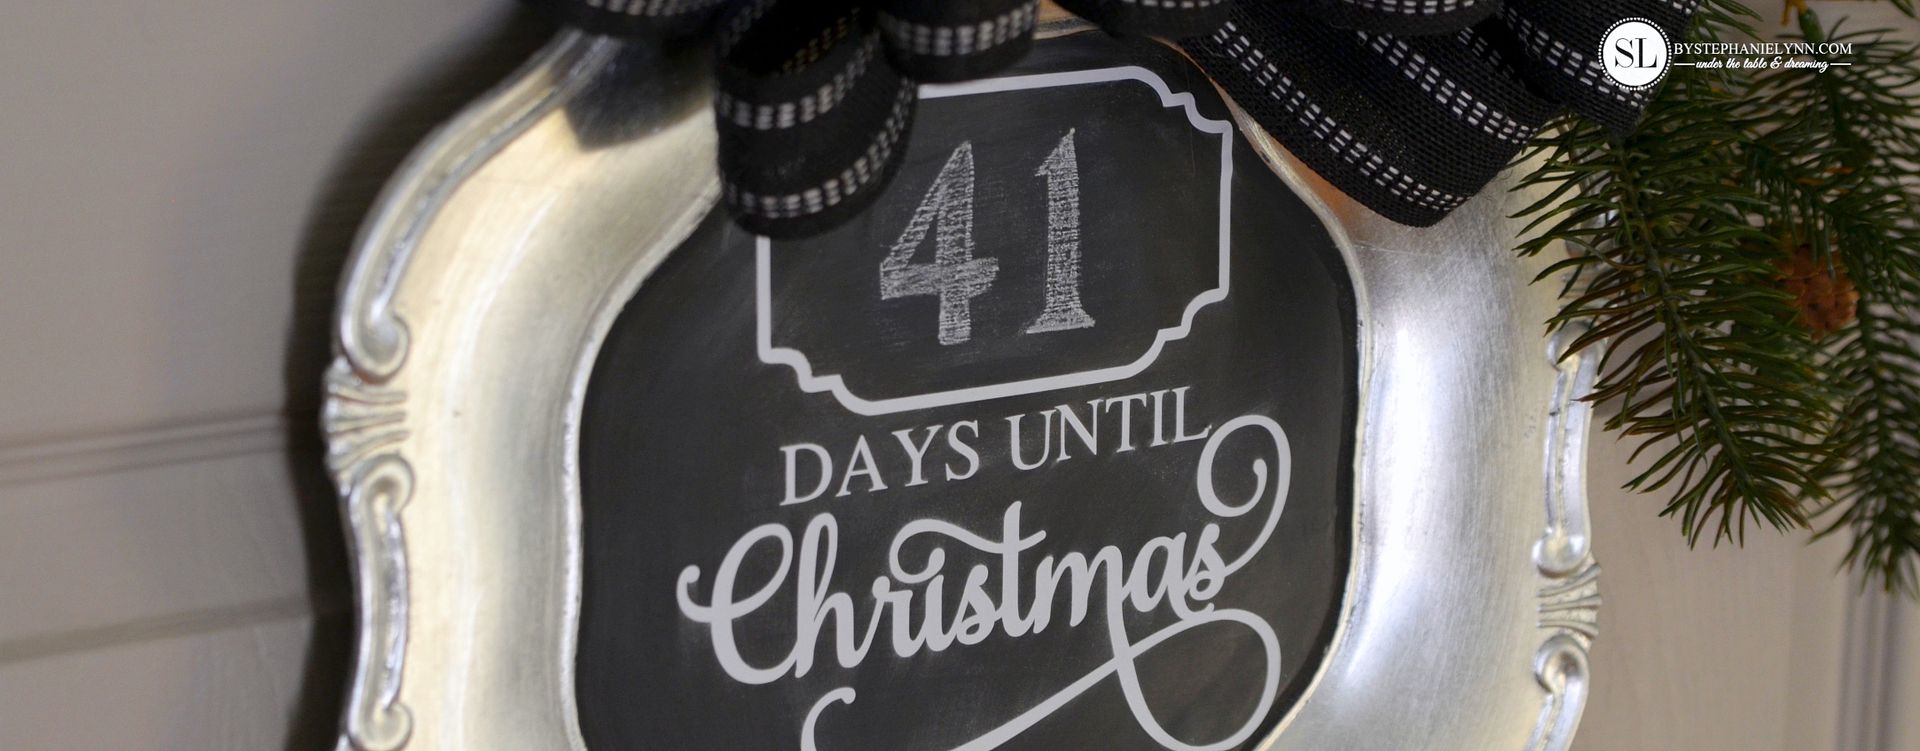 Christmas Countdown Chalkboard Charger | #madewithmichaels Pinterest Party #michaelsmakers